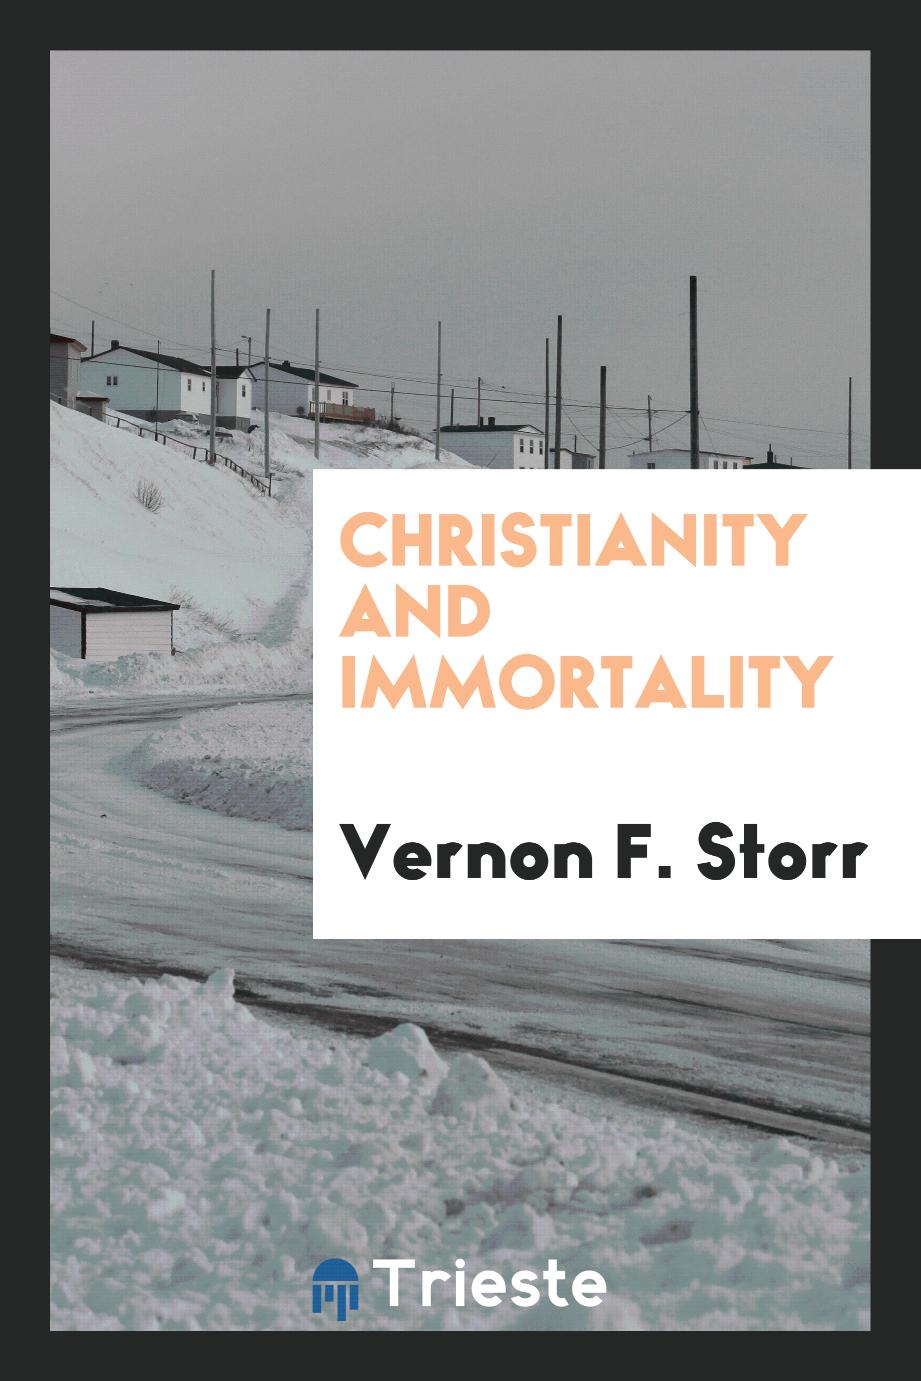 Christianity and immortality